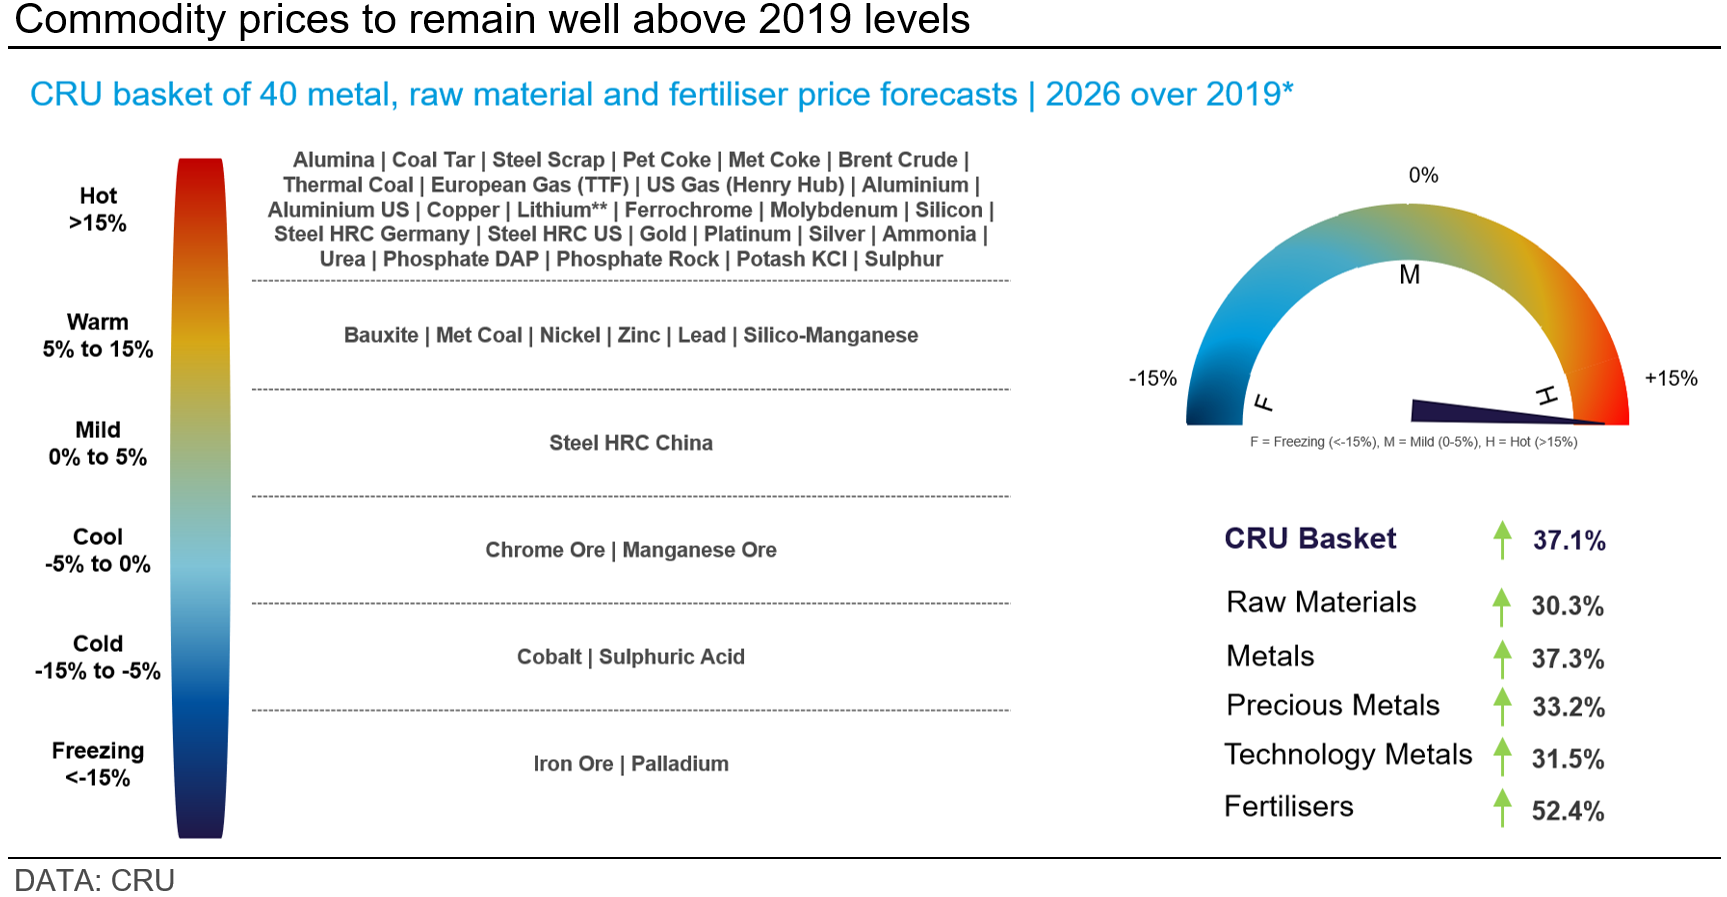 Graph showing commodity prices to remain well above 2019 levels